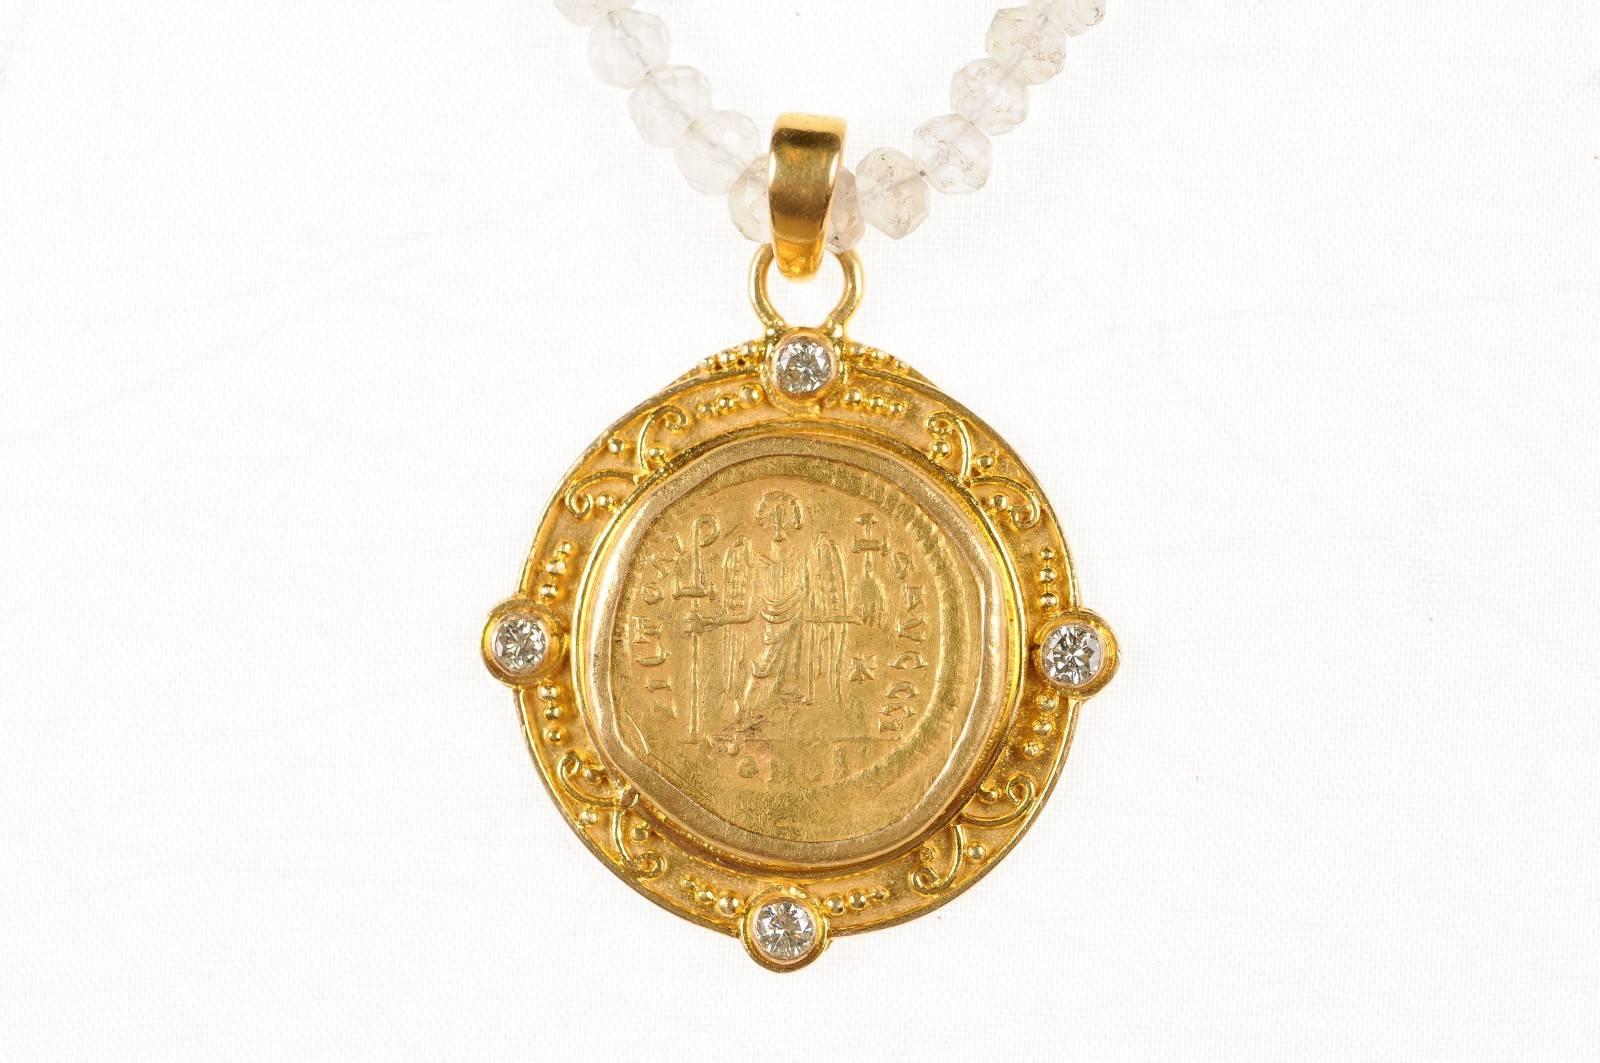 An authentic Justinian I, AV Gold Solidius Roman Imperial Coin (Constantinople Mint, circa 545-563 AD), within a custom round 22-karat gold bezel pendant with decorative accents and diamonds set at four points, and a 22-karat gold bail. The obverse,